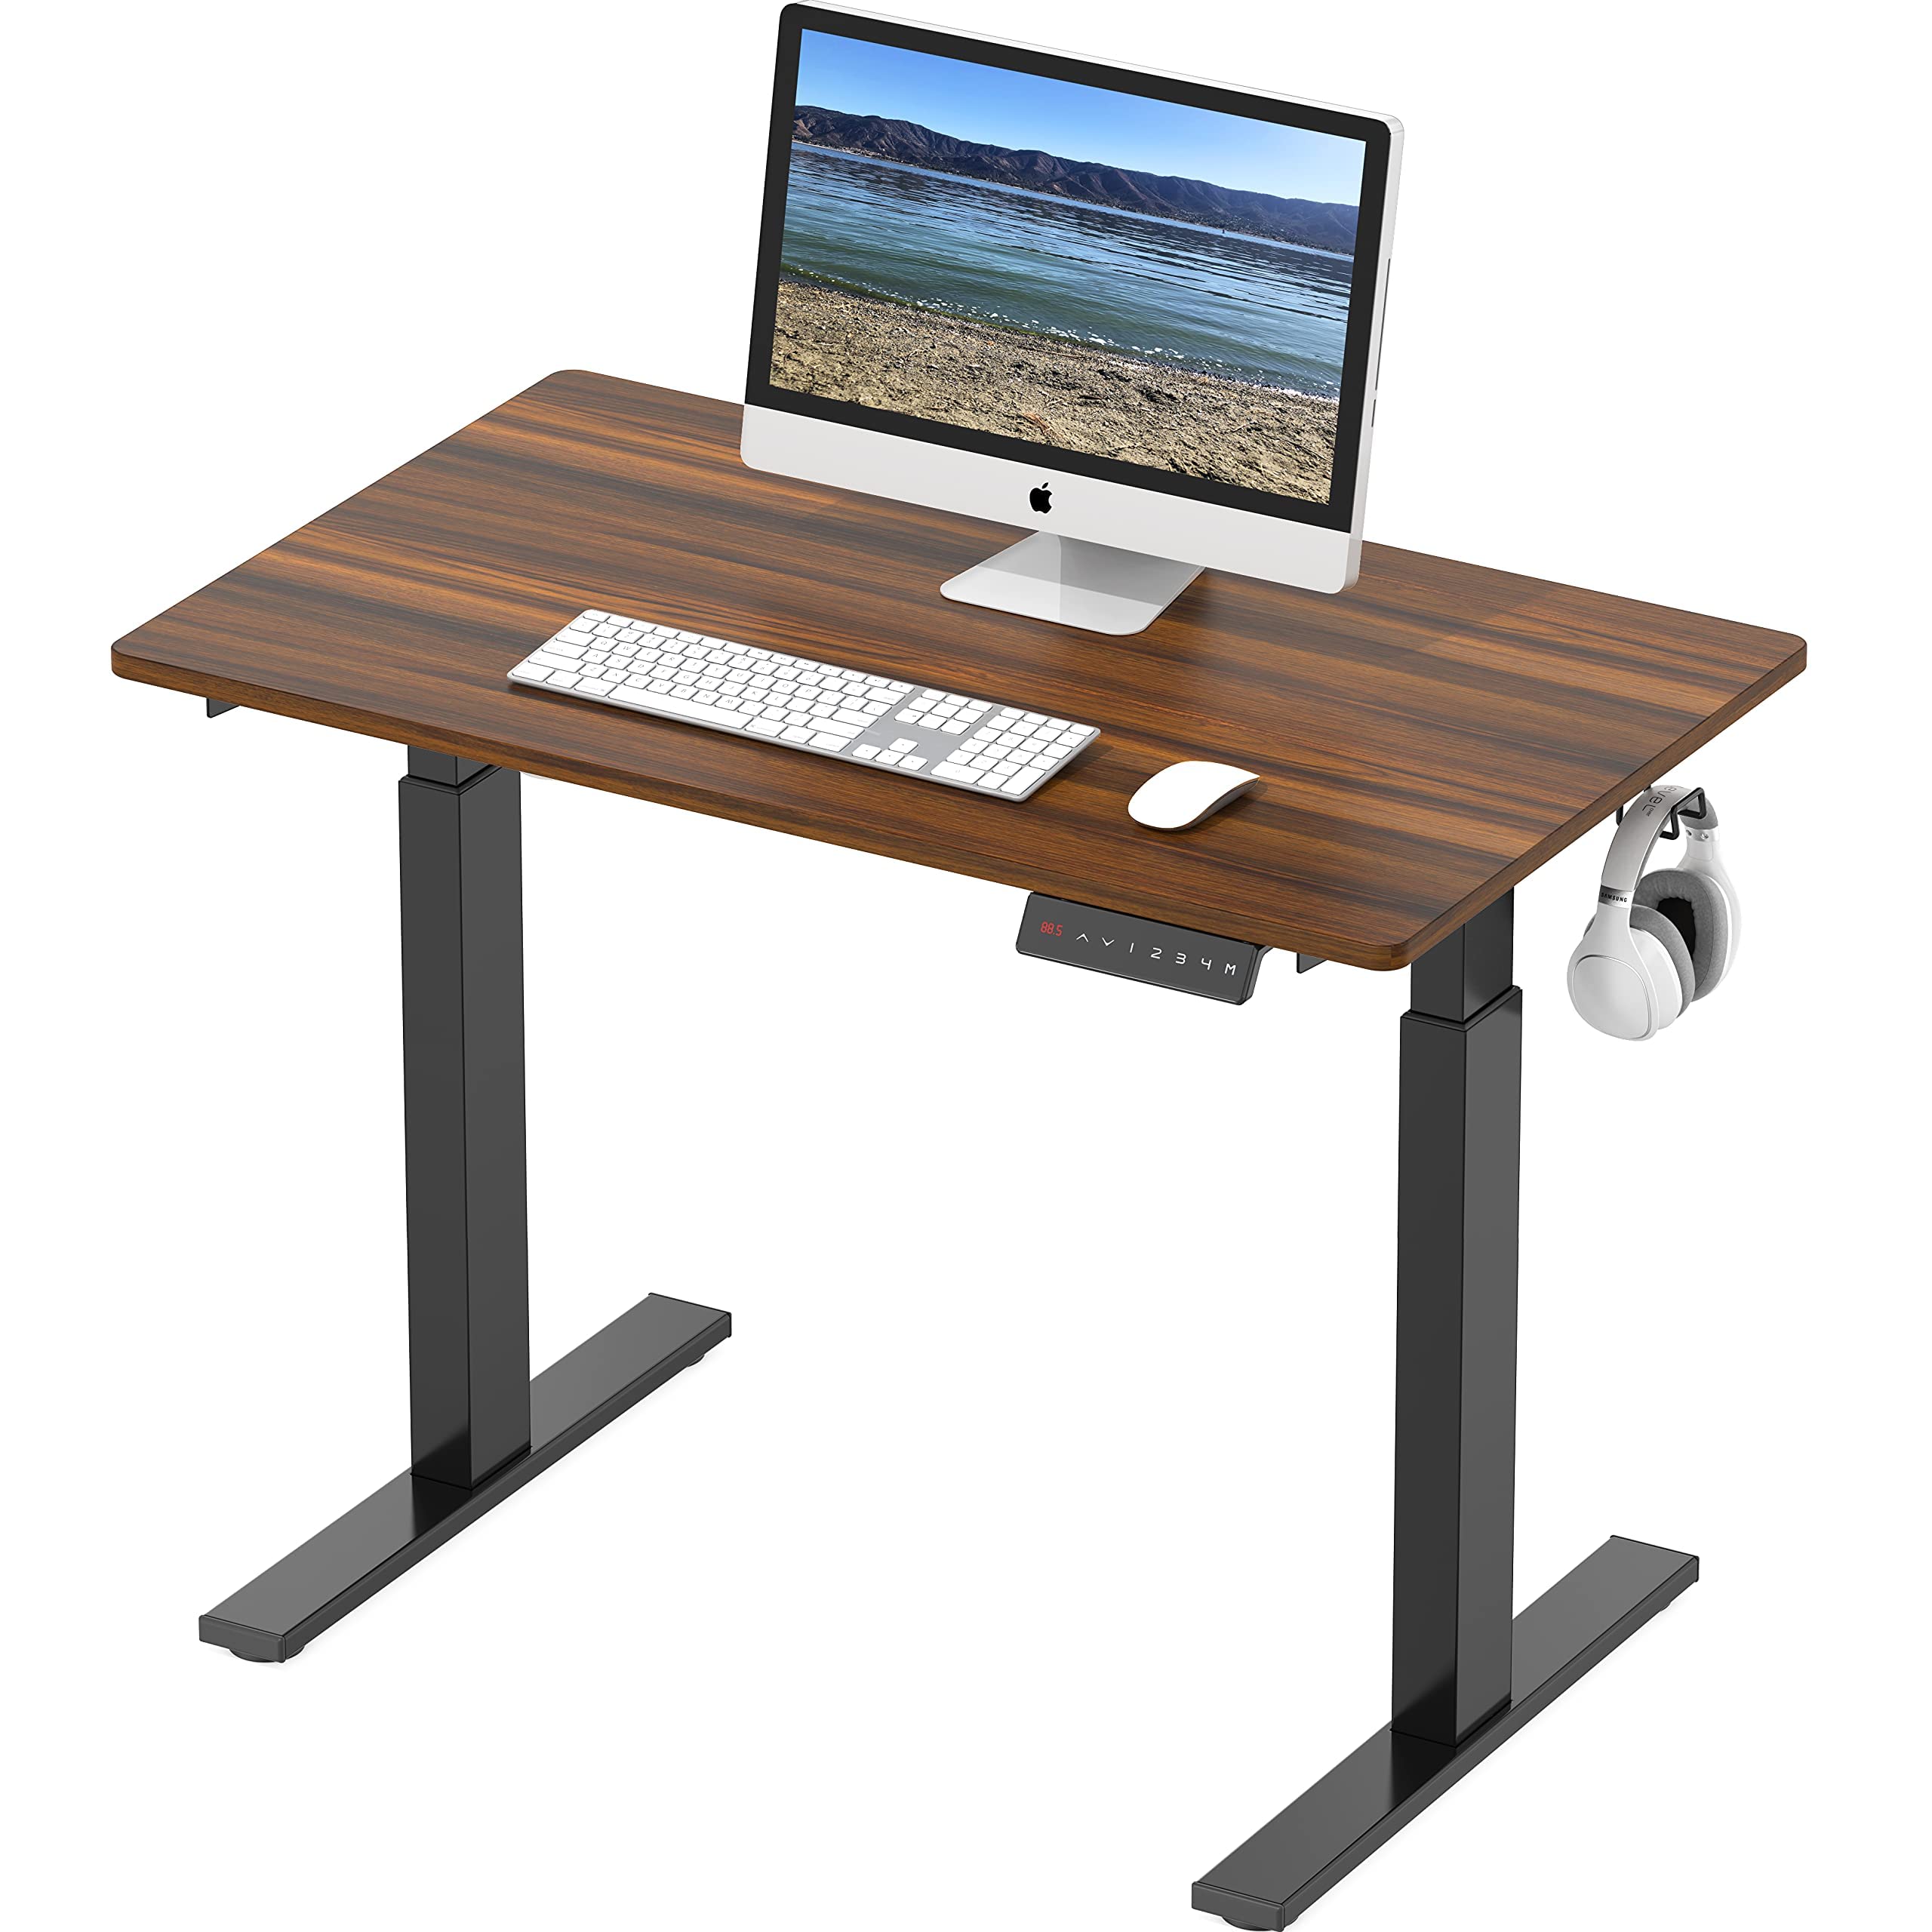 Shw Electric Height Adjustable Standing Desk, 40 X 24 Inches, Walnut